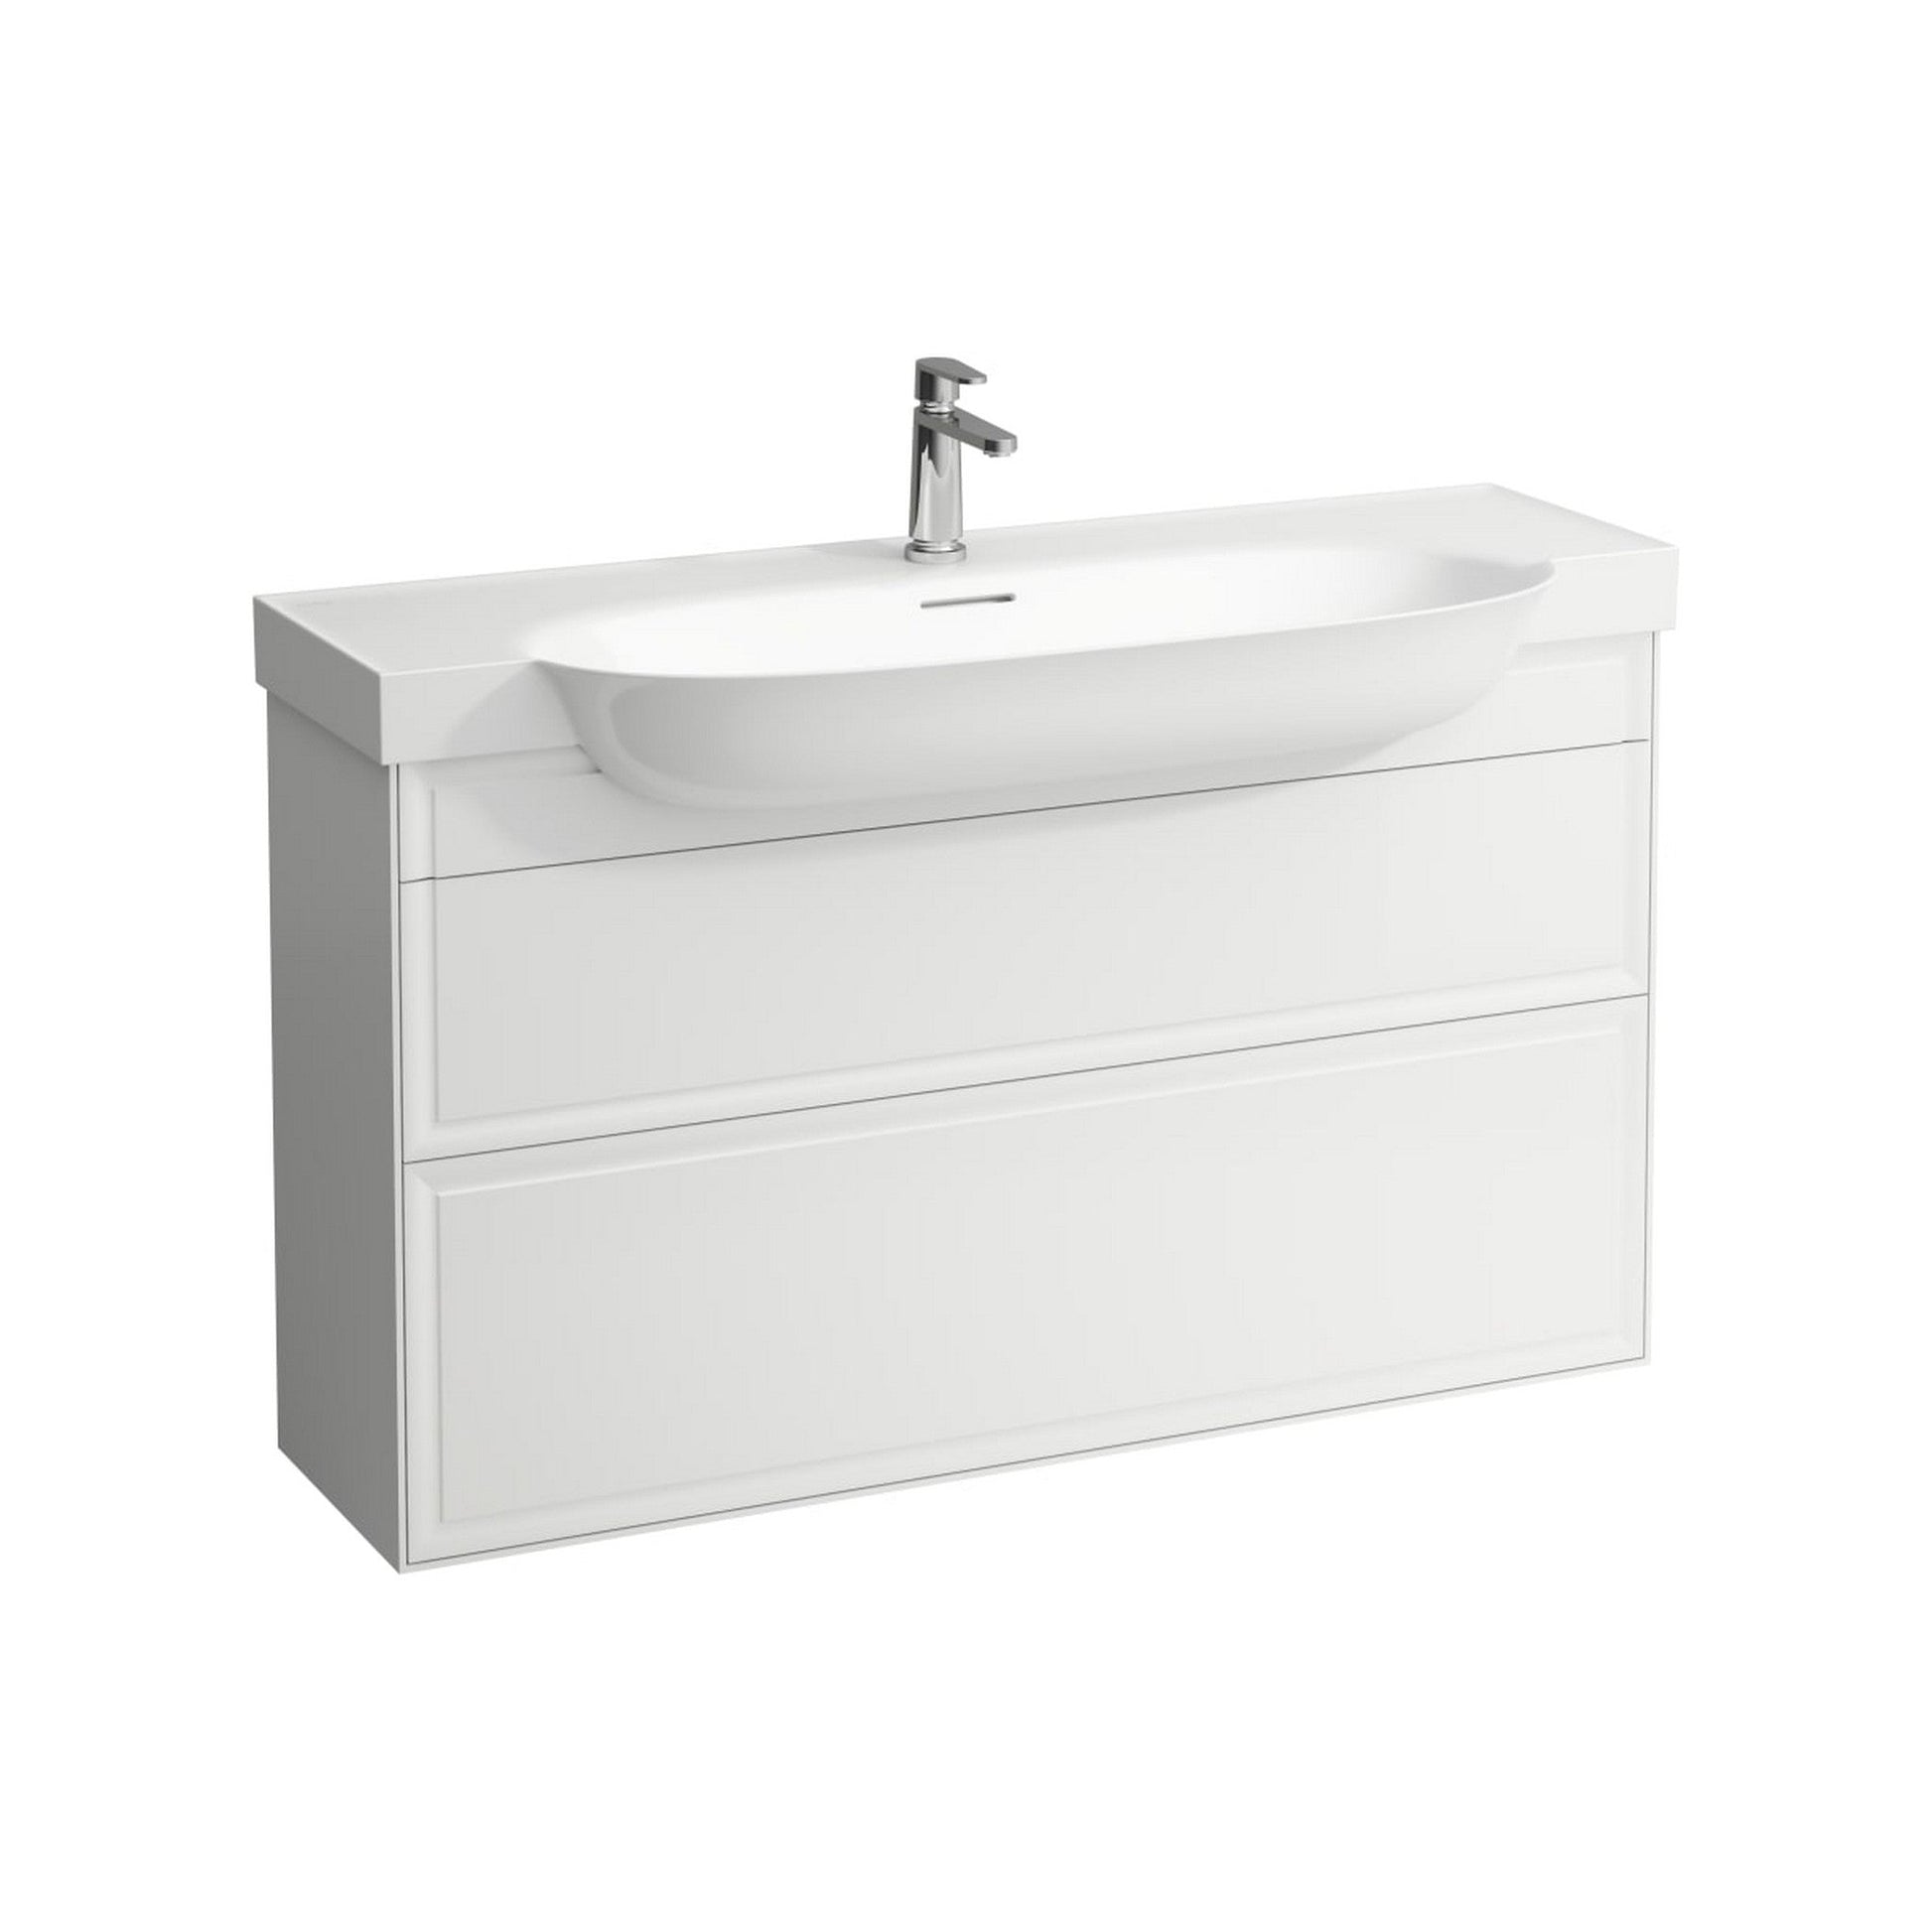 Laufen New Classic 46" 2-Drawer Matte White Wall-Mounted Vanity for New Classic Bathroom Sink Model: H813858